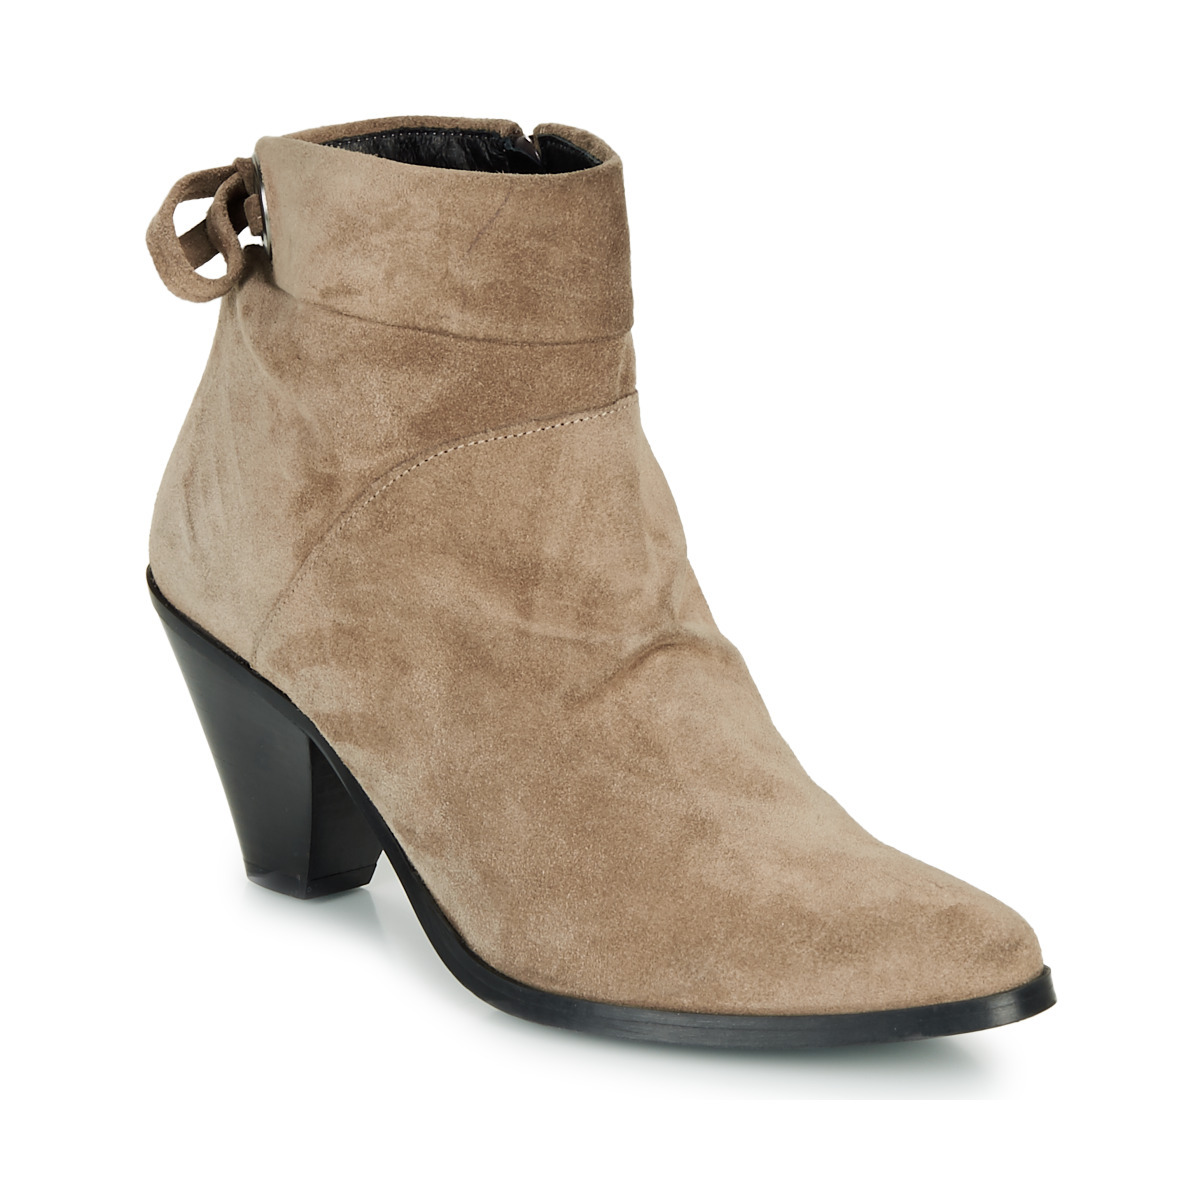 Regard Ankle Boots in Beige for Woman at Spartoo GOOFASH